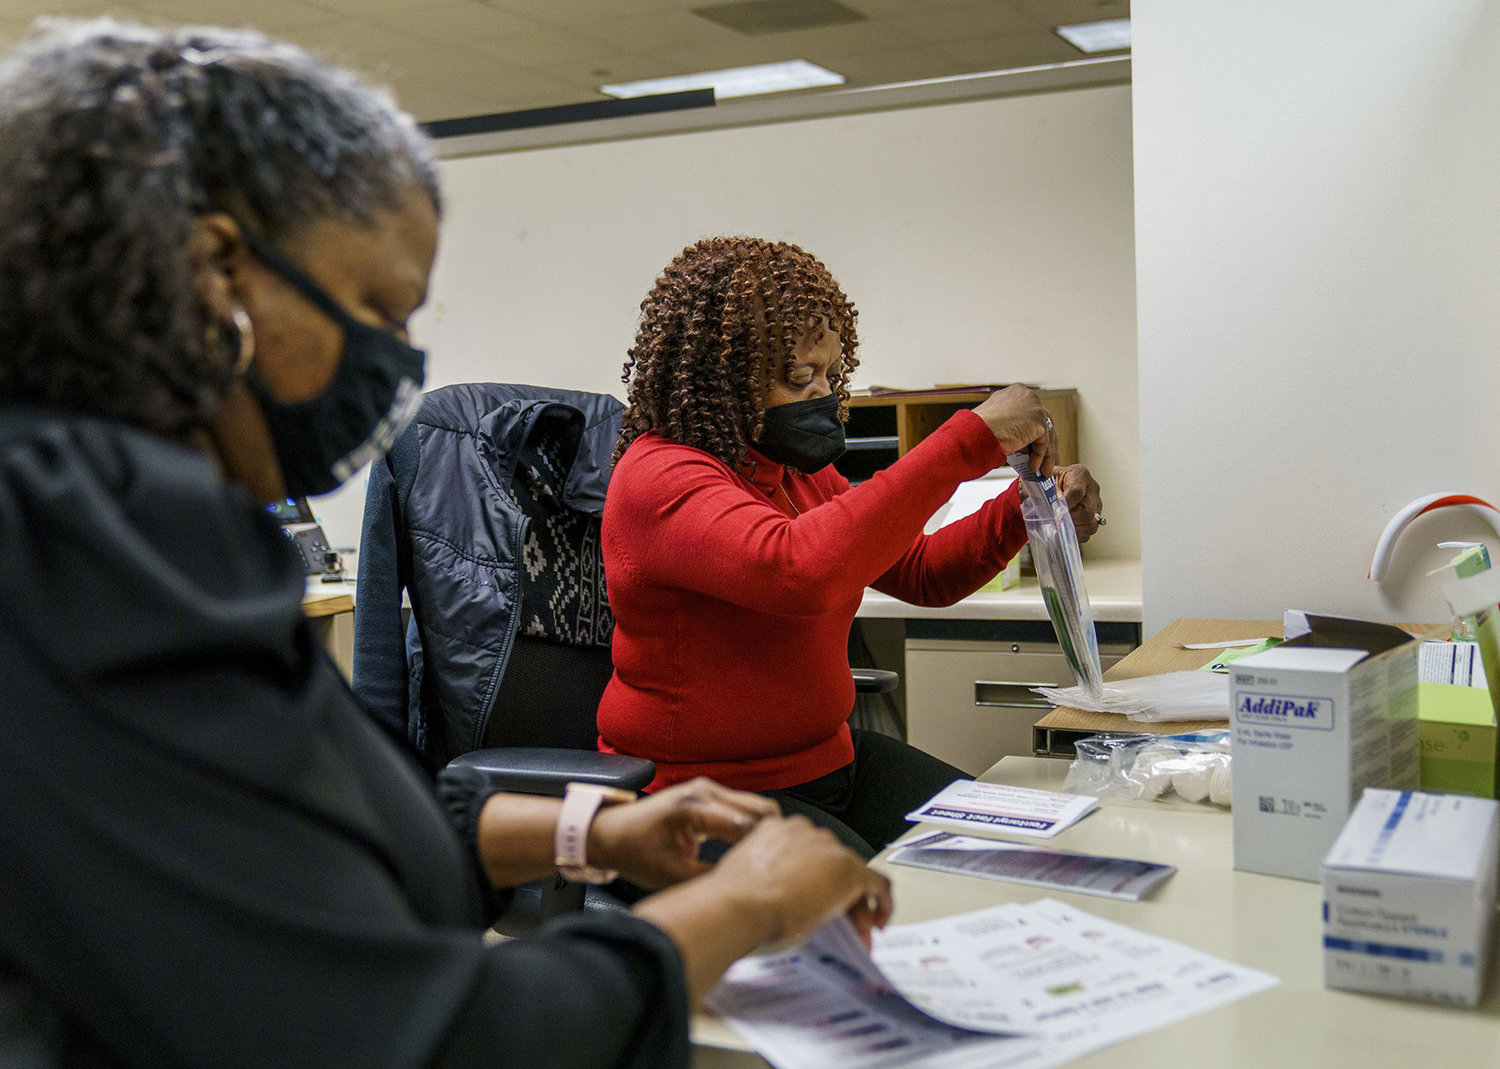 Patricia Johnson, left, and Shirley Anne Tankersley put together fentanyl testing strip packets at a Chicago Department of Public Health office Thursday, Dec. 9, 2021. The city has started passing out the kits to help stem opioid-related overdoses, the vast majority of which involve fentanyl. (Armando L. Sanchez/Chicago Tribune/TNS)